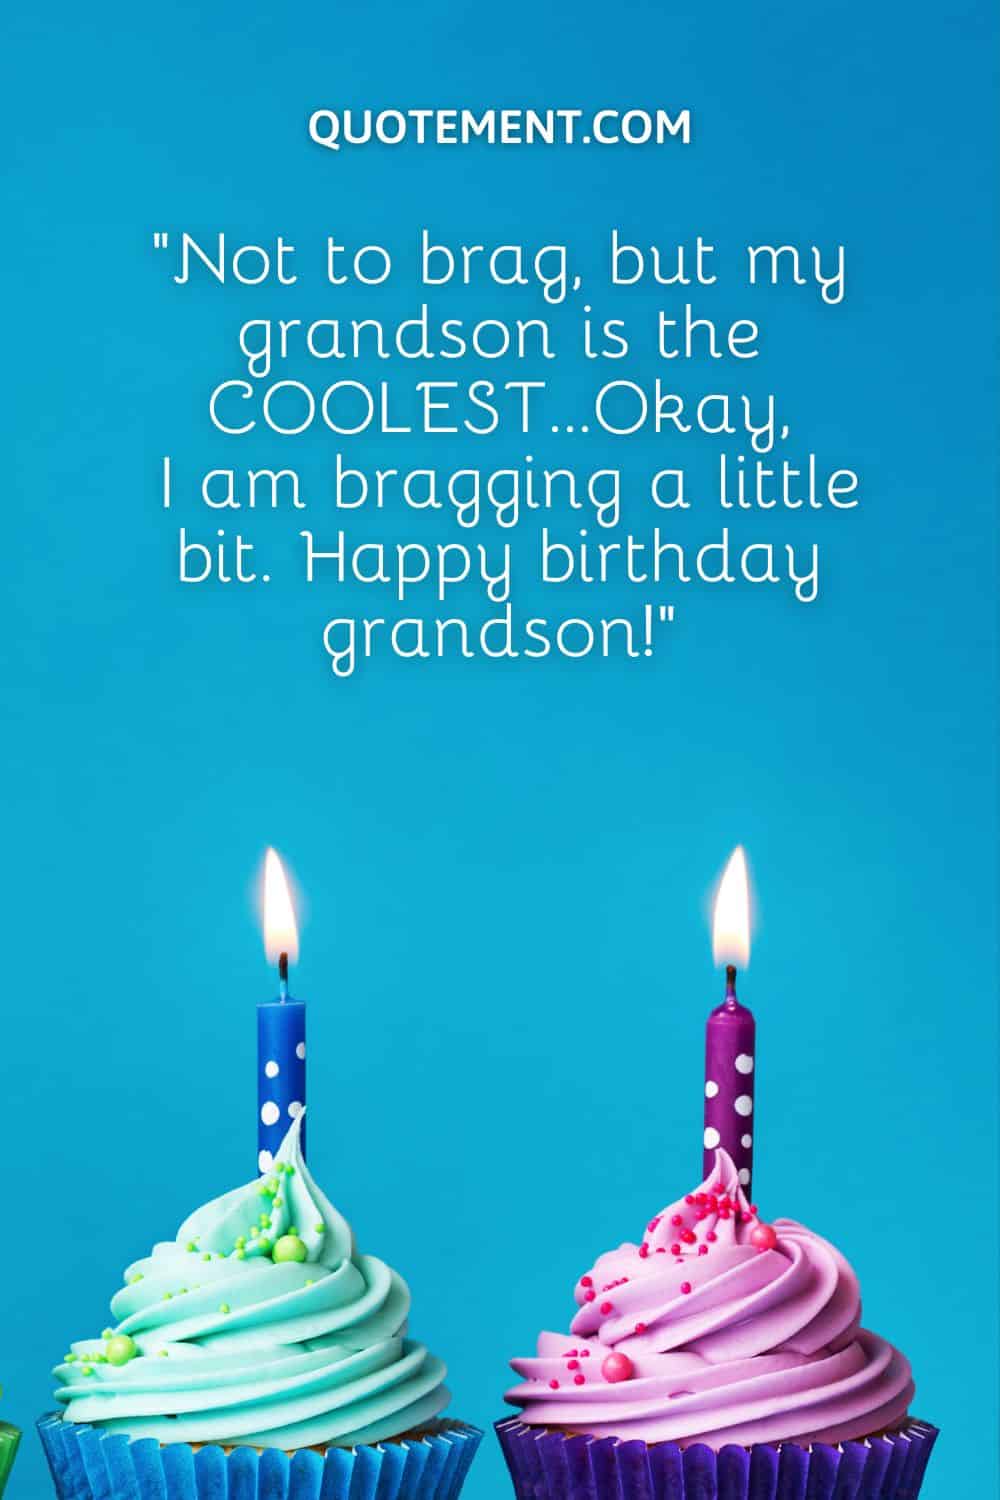 “Not to brag, but my grandson is the COOLEST…Okay, I am bragging a little bit. Happy birthday grandson!”